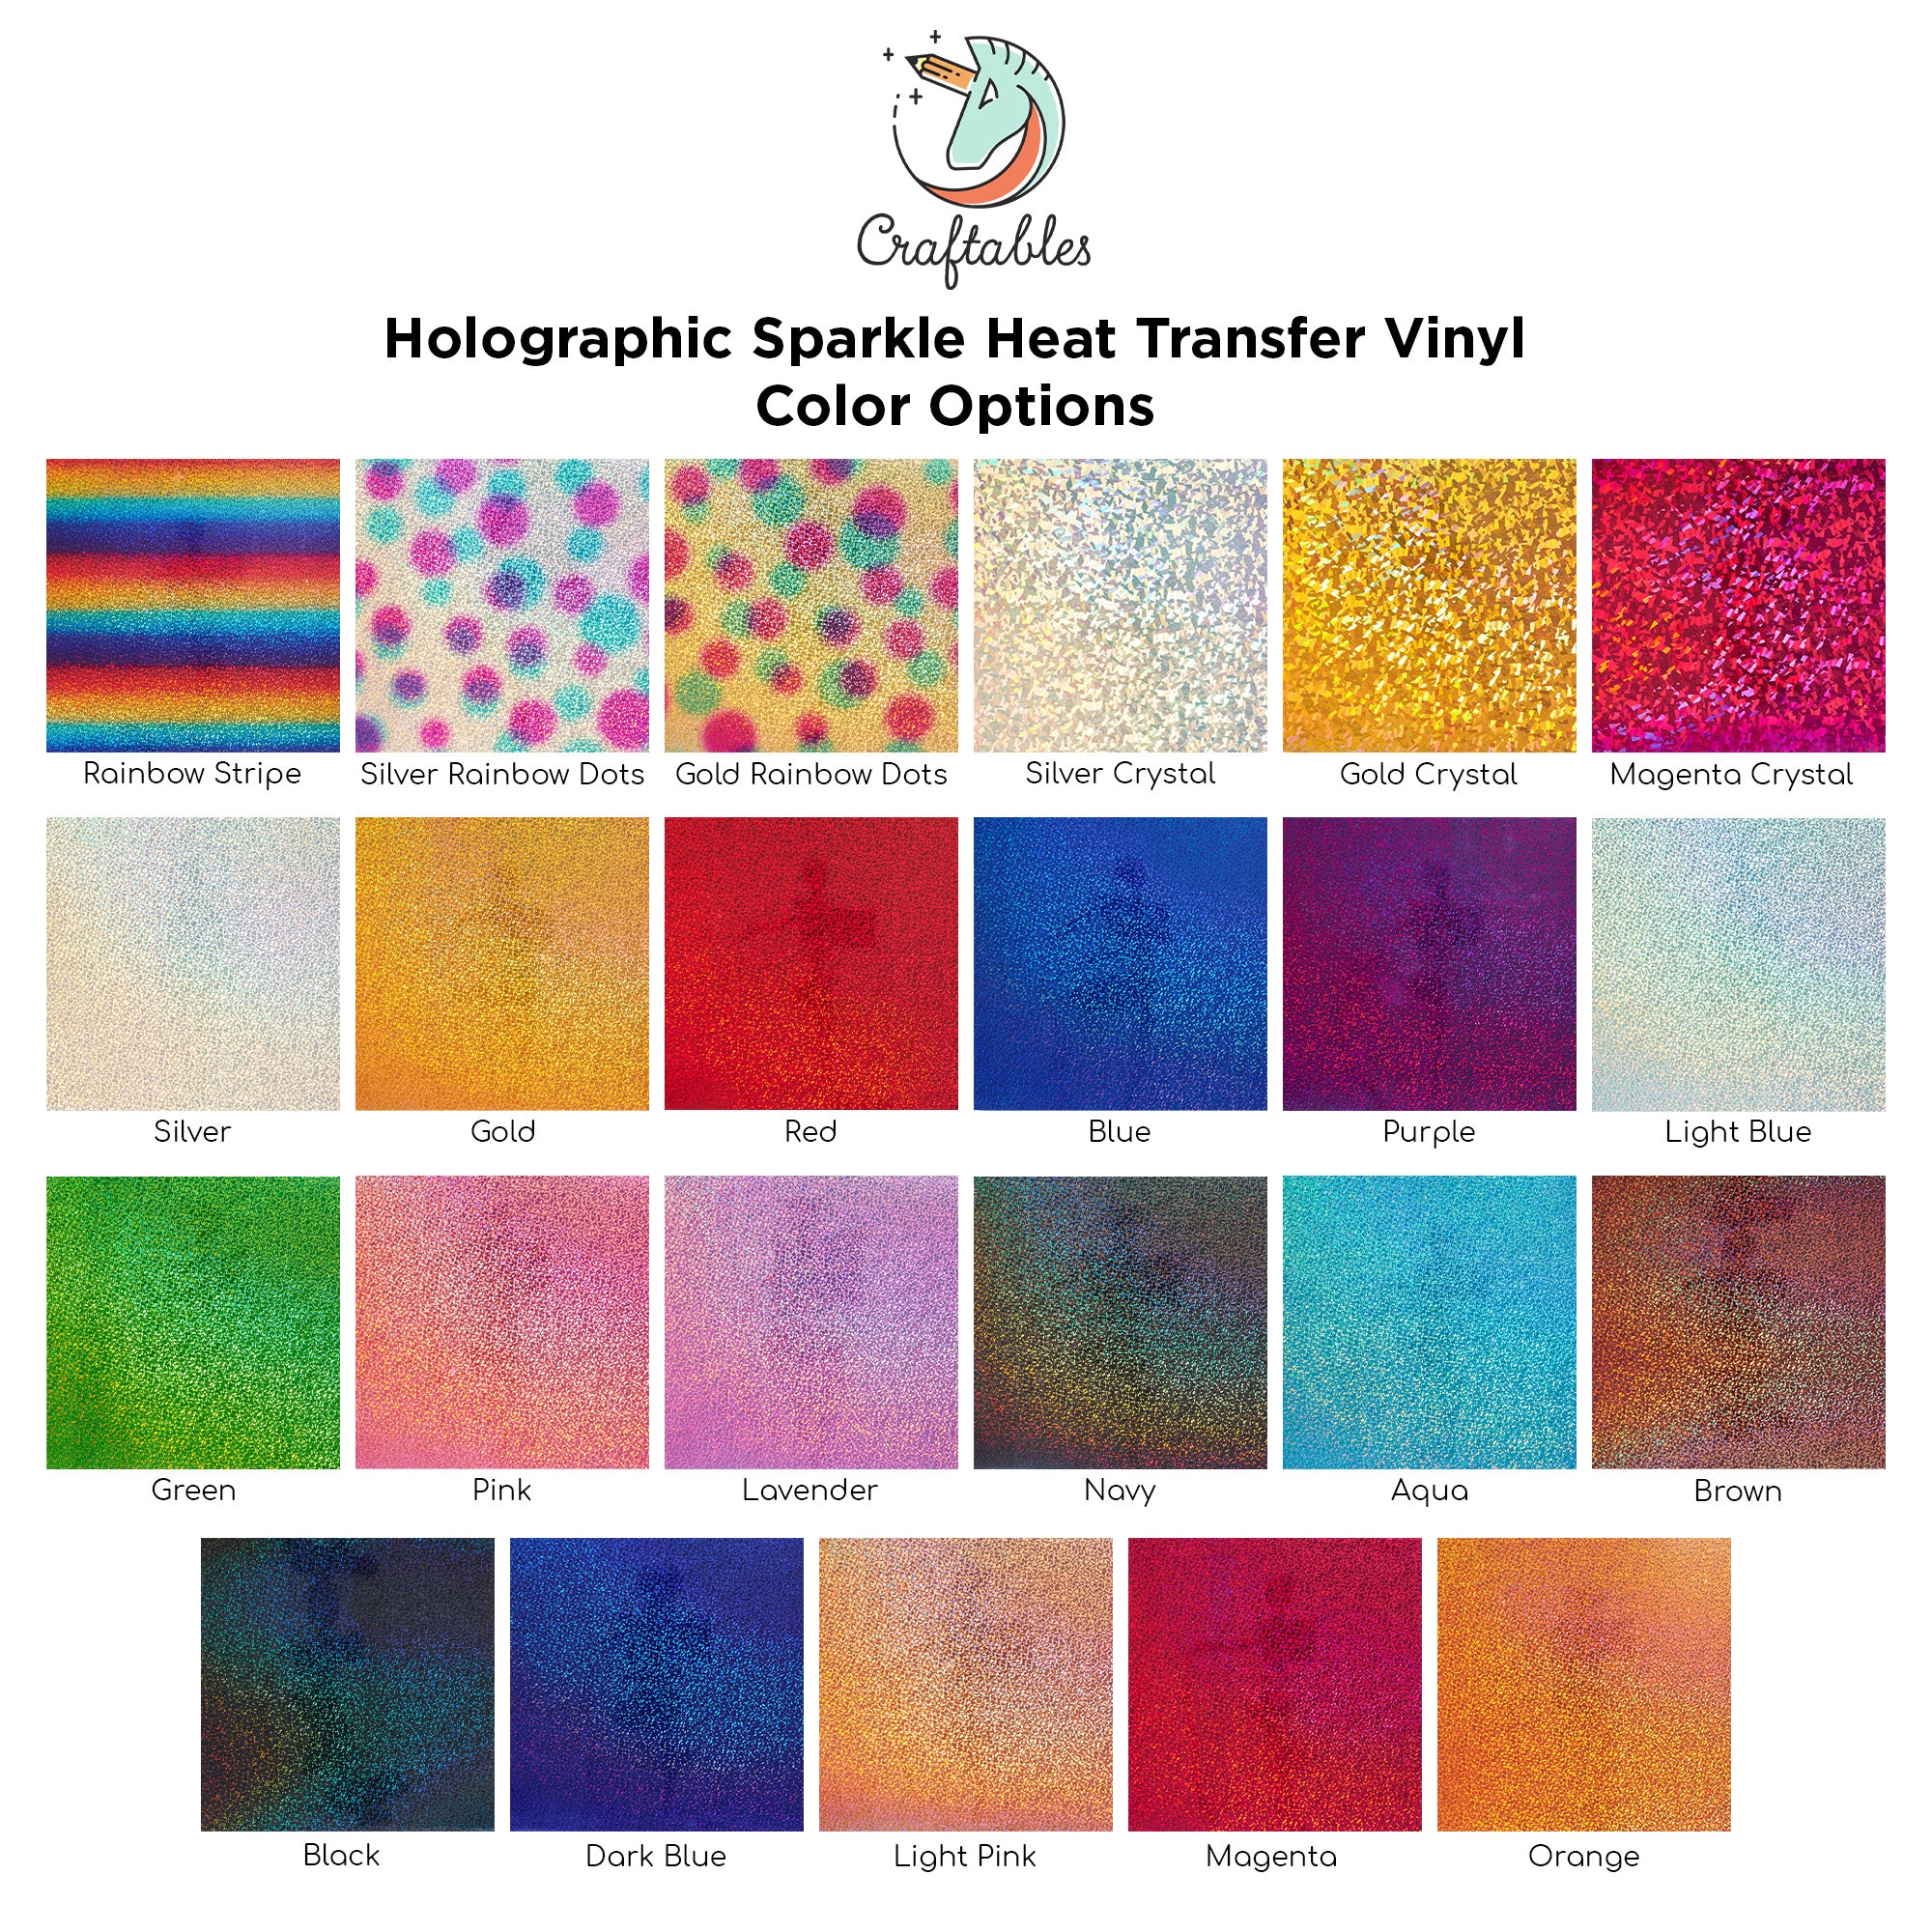 Silver Holographic Sparkle Heat Transfer Vinyl Sheets By Craftables –  shopcraftables